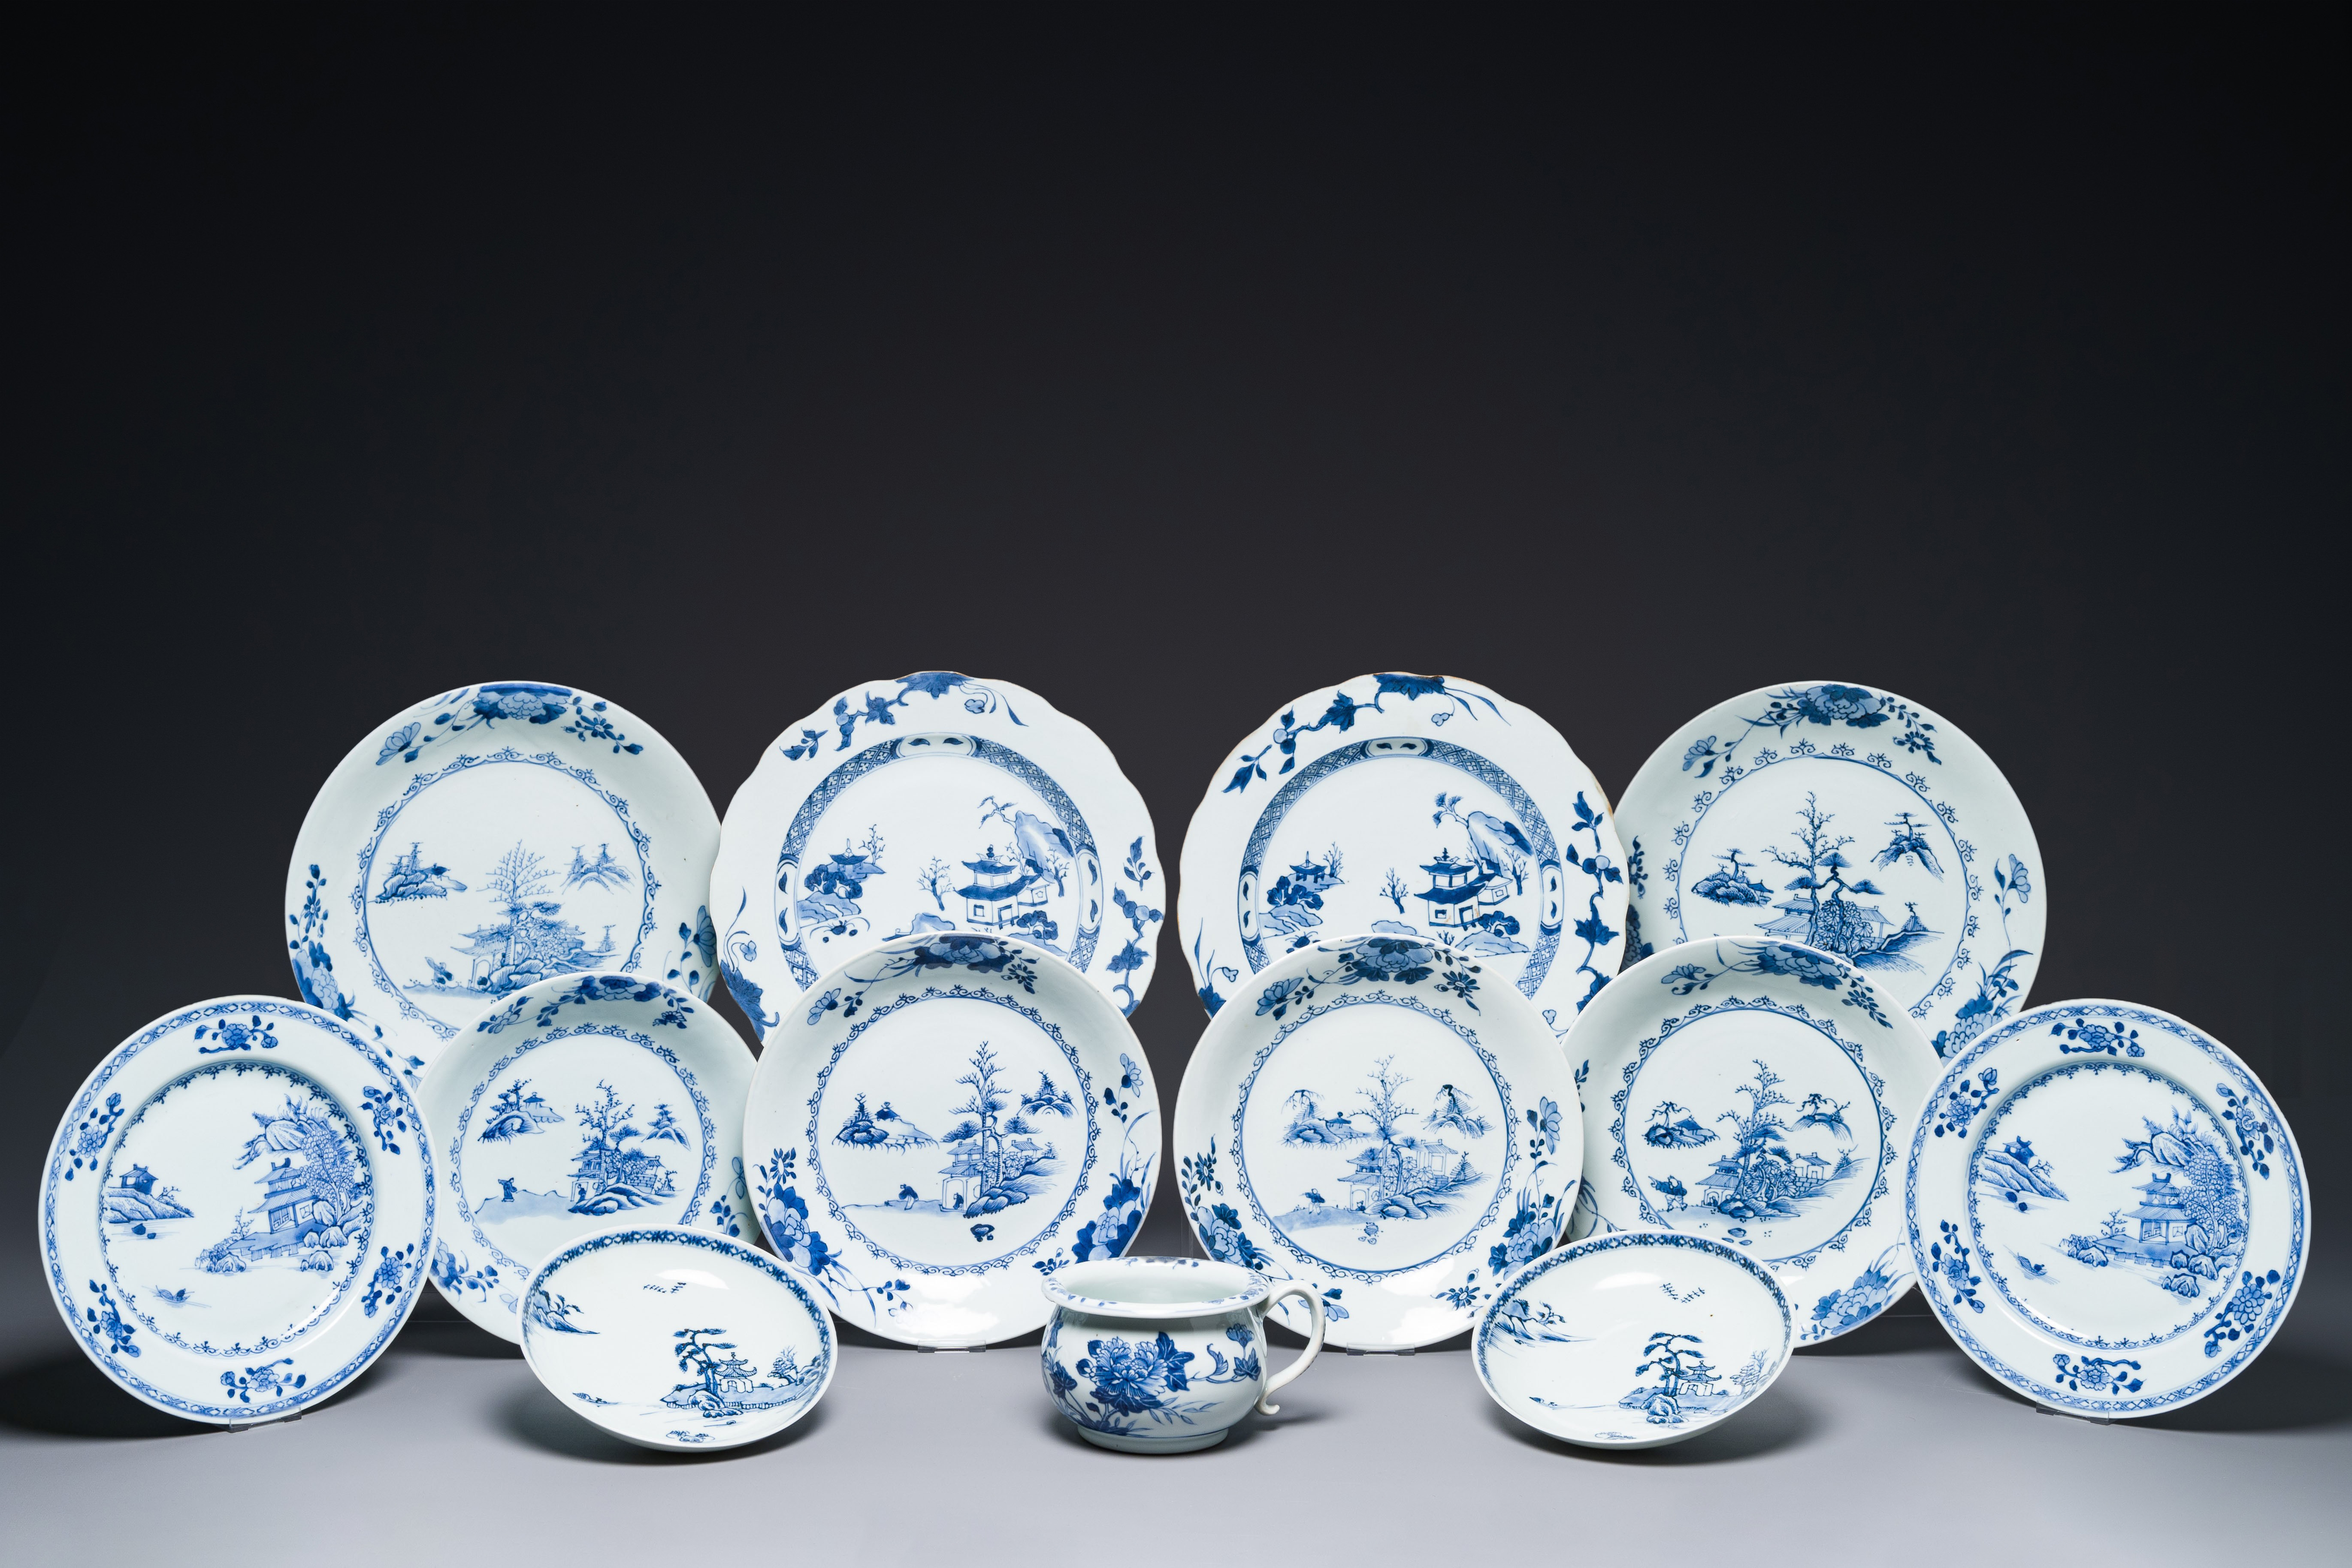 A collection of 13 pieces of Chinese blue and white shipwreck porcelain from the Nanking cargo, Qian